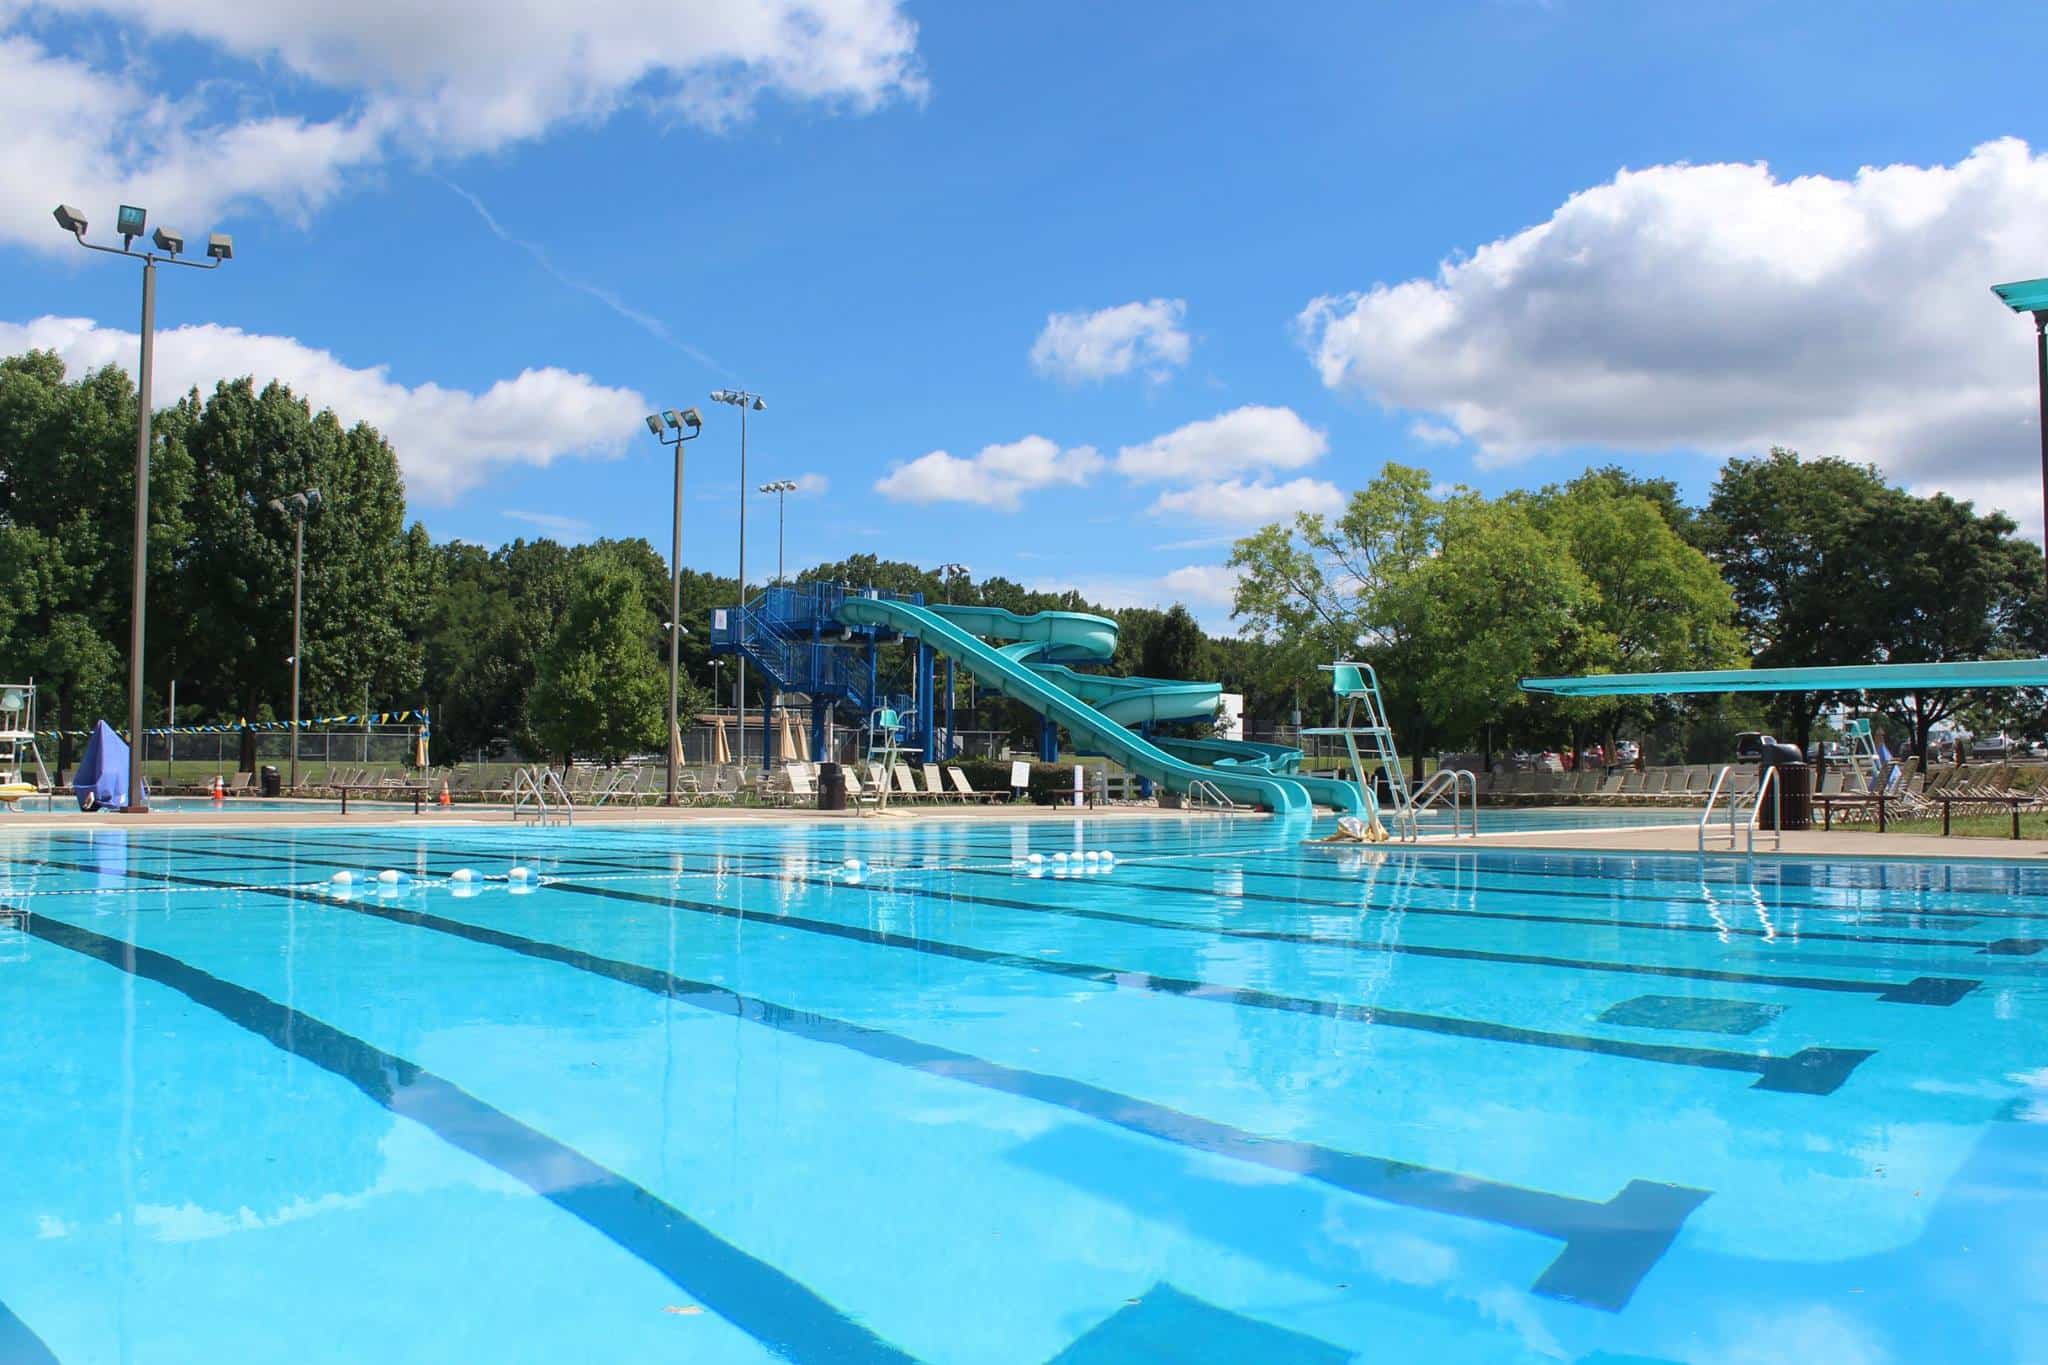 The Pool at LMT - Lower Makefield Township